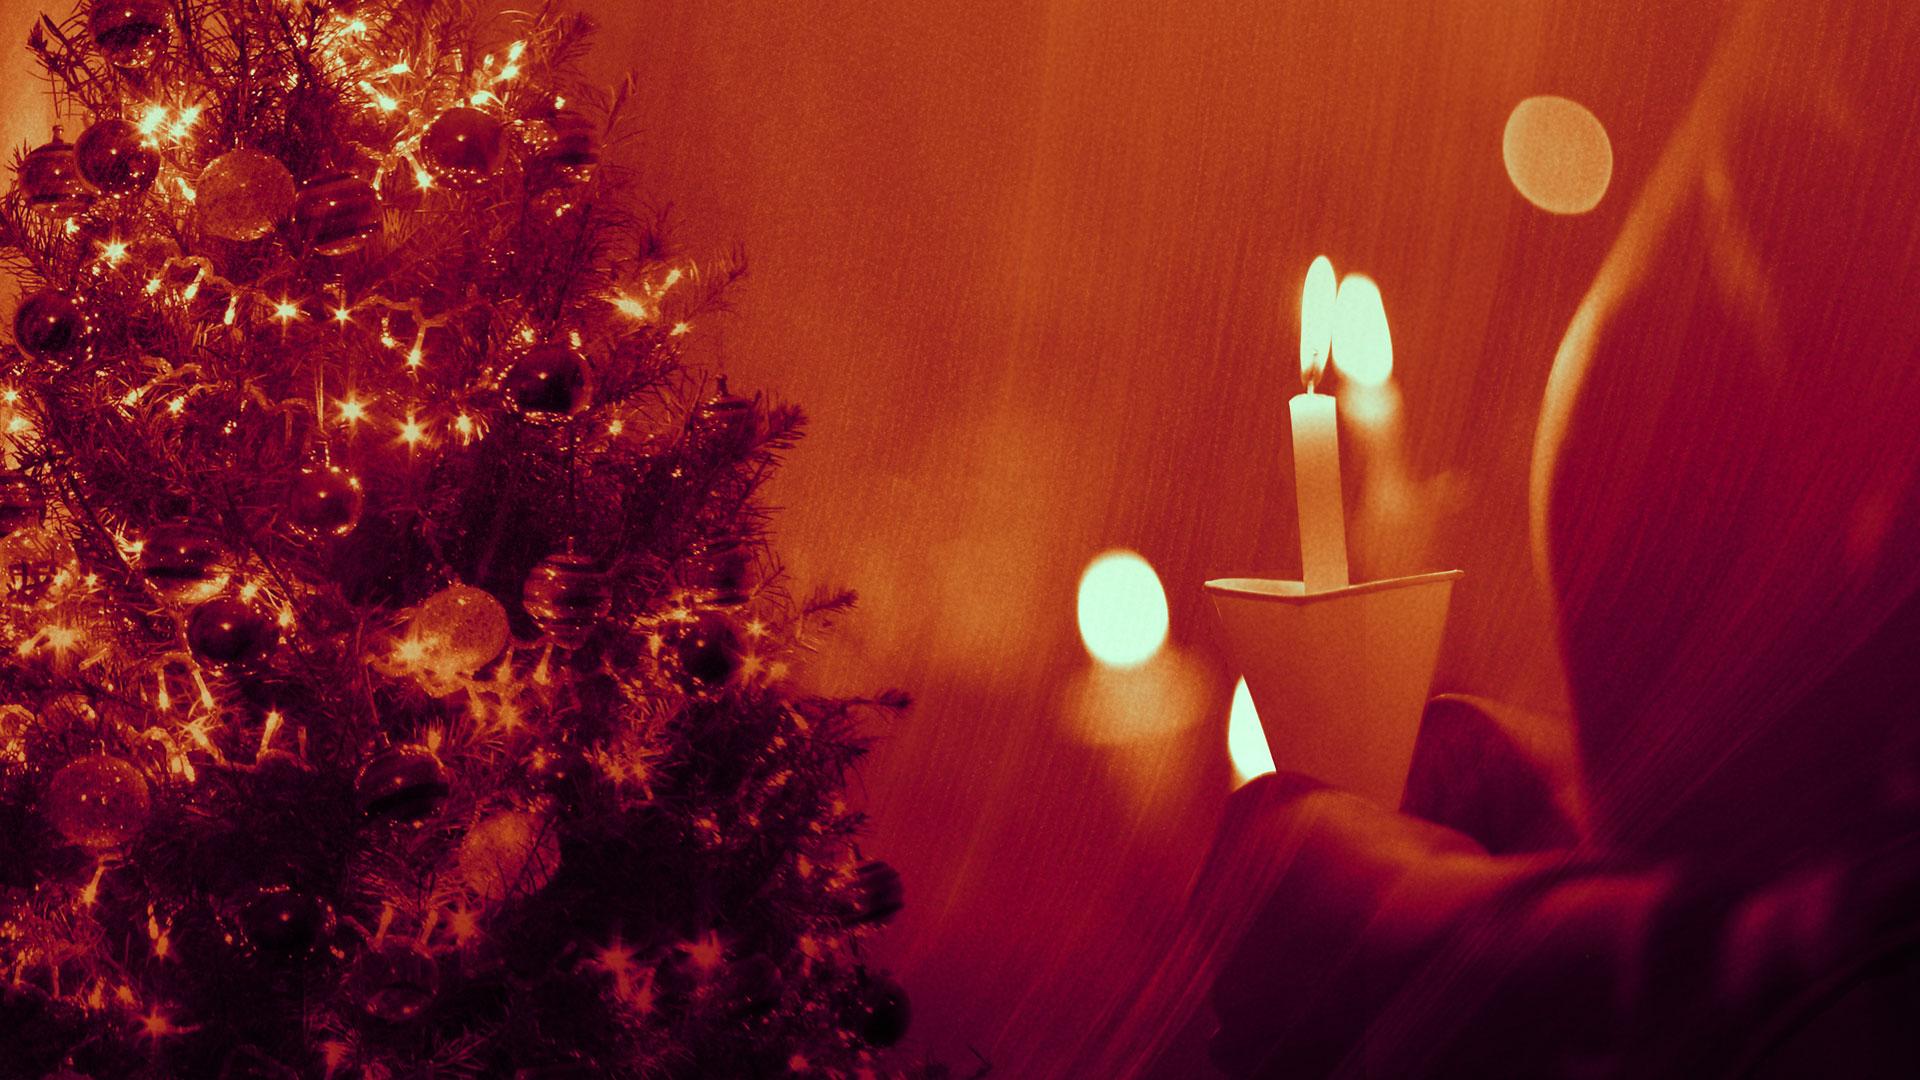 Creative Ideas To Make Your Church's Christmas Service